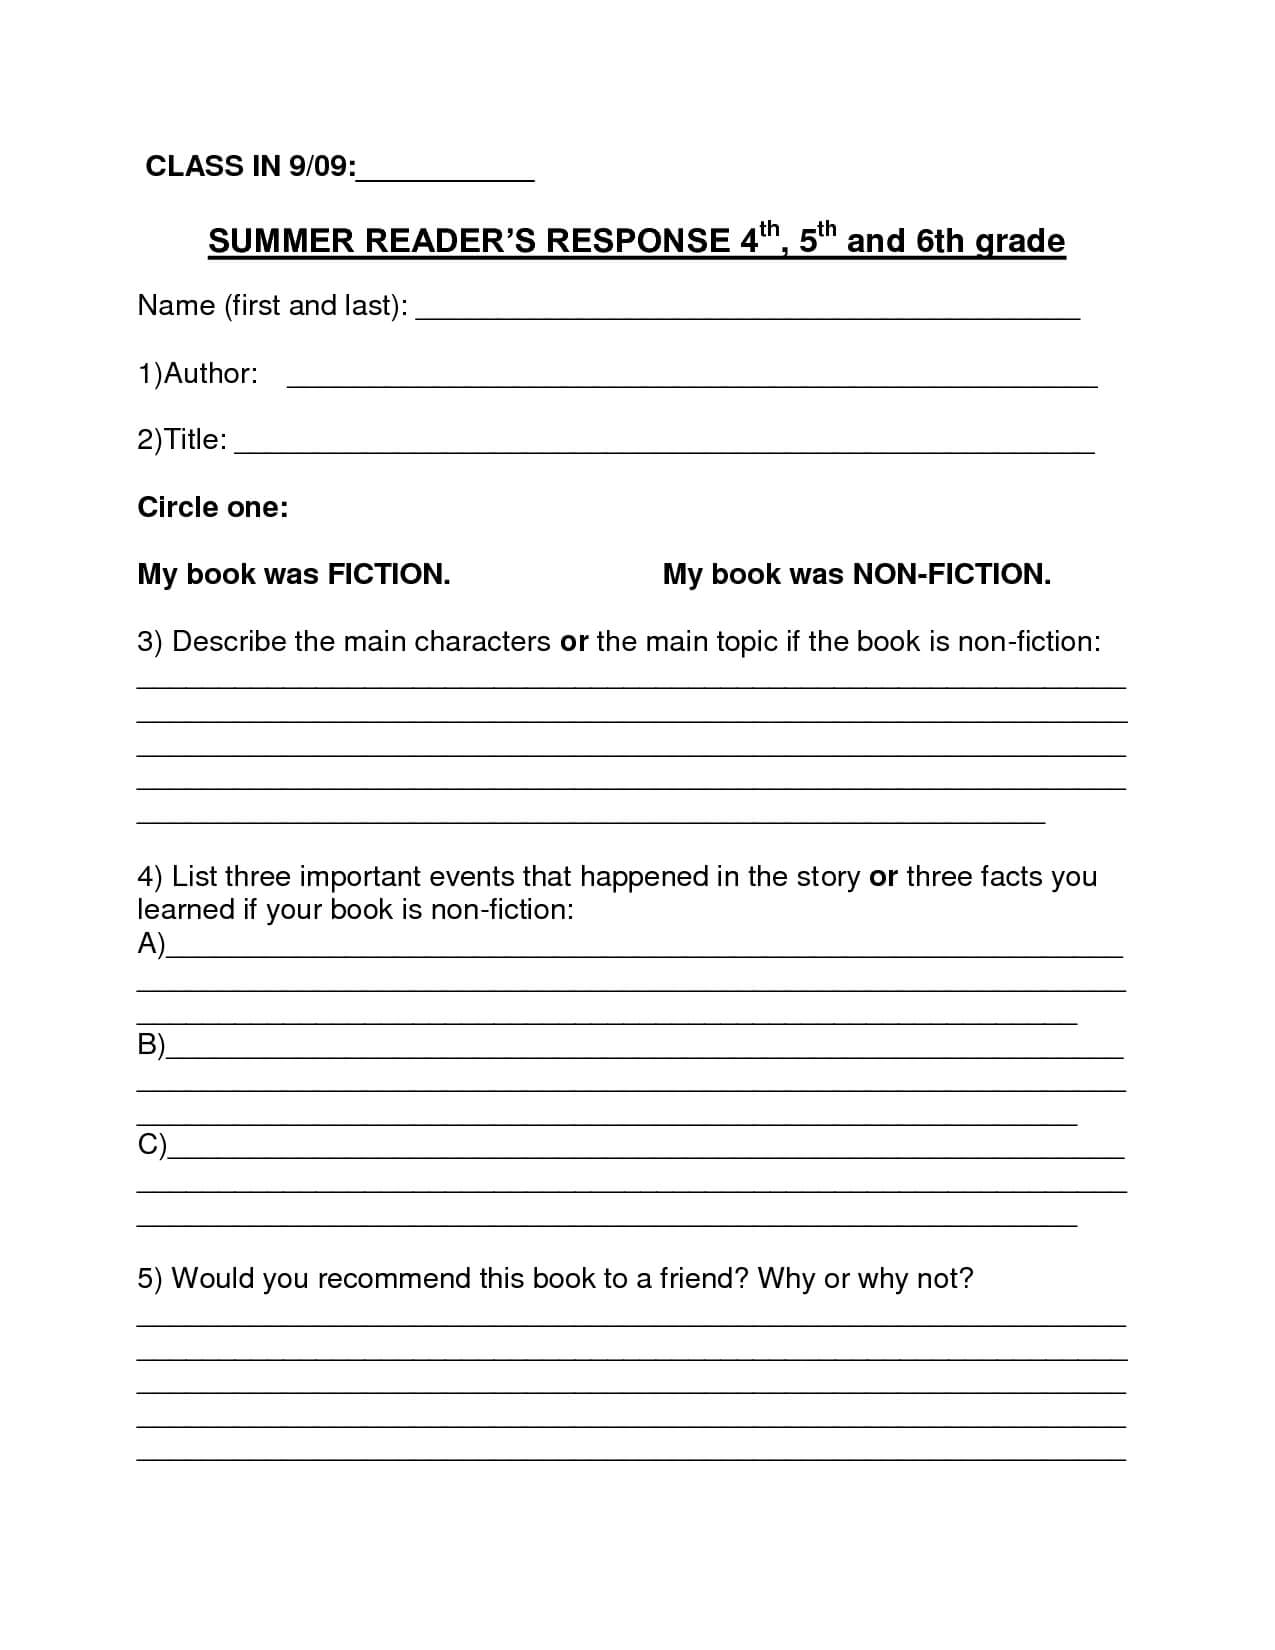 Image Result For Book Report Summer Reading Form 6Th Grade With Middle School Book Report Template